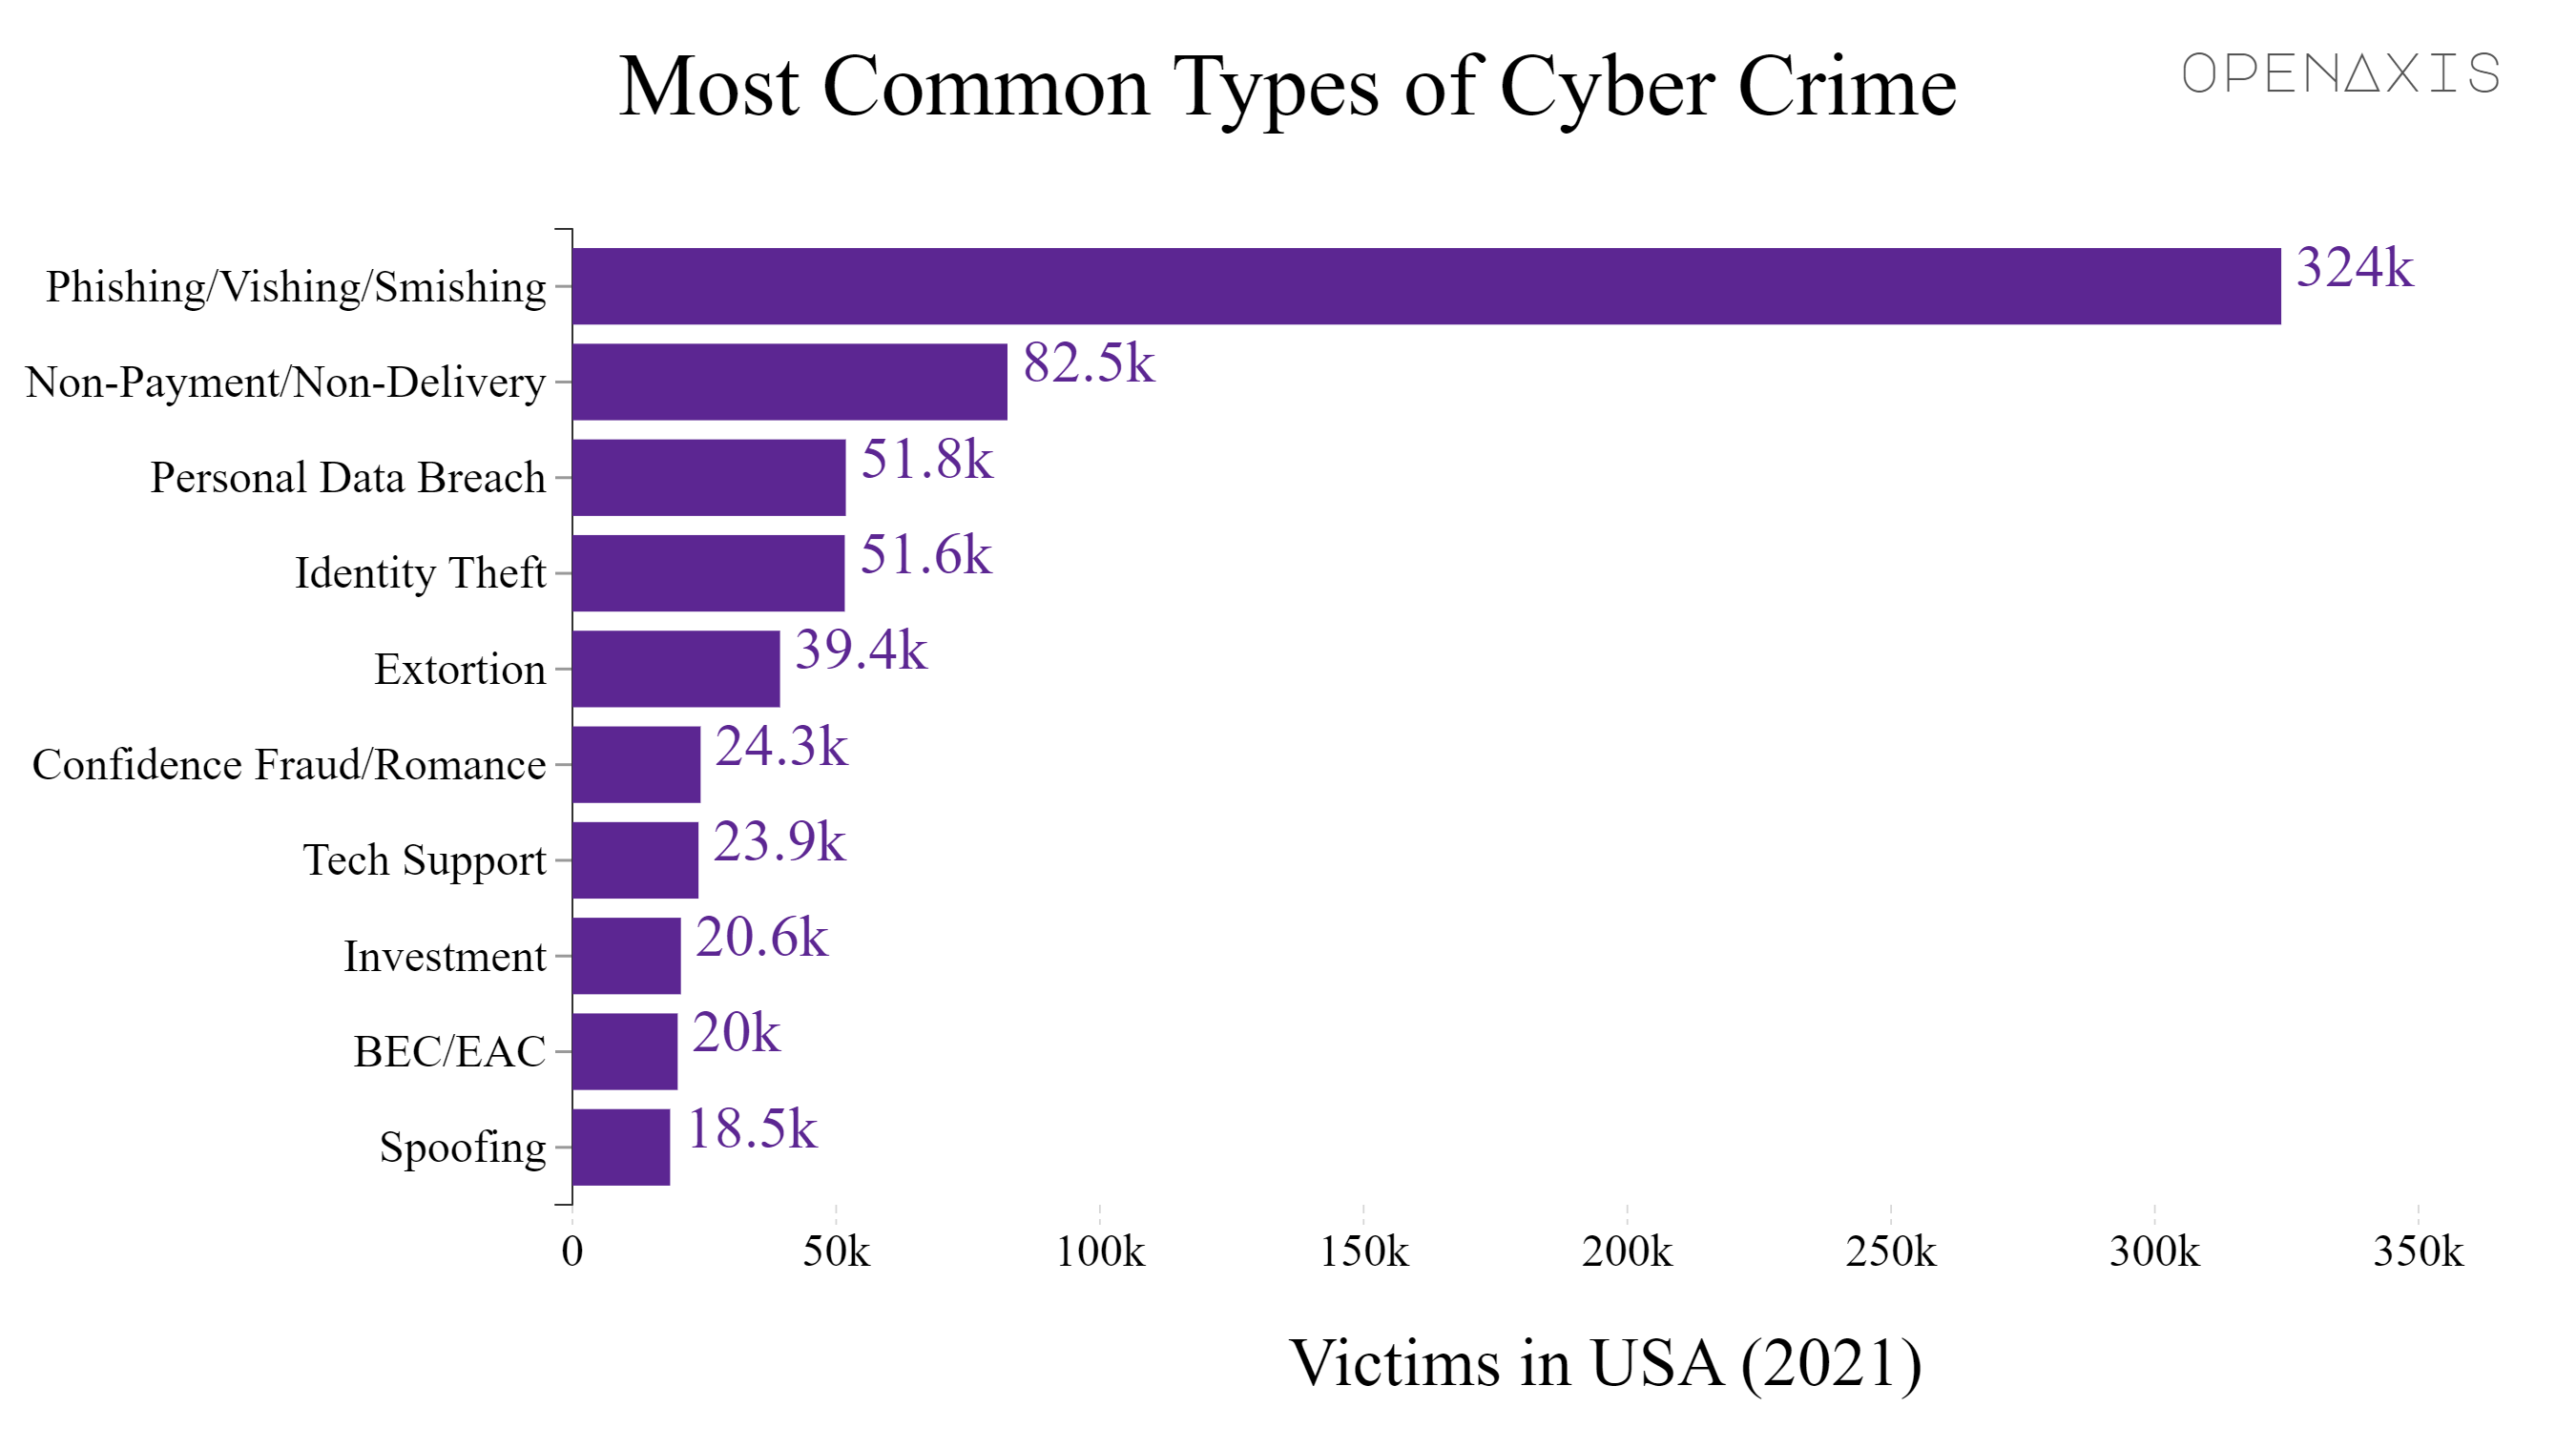 "Most Common Types of Cyber Crime"